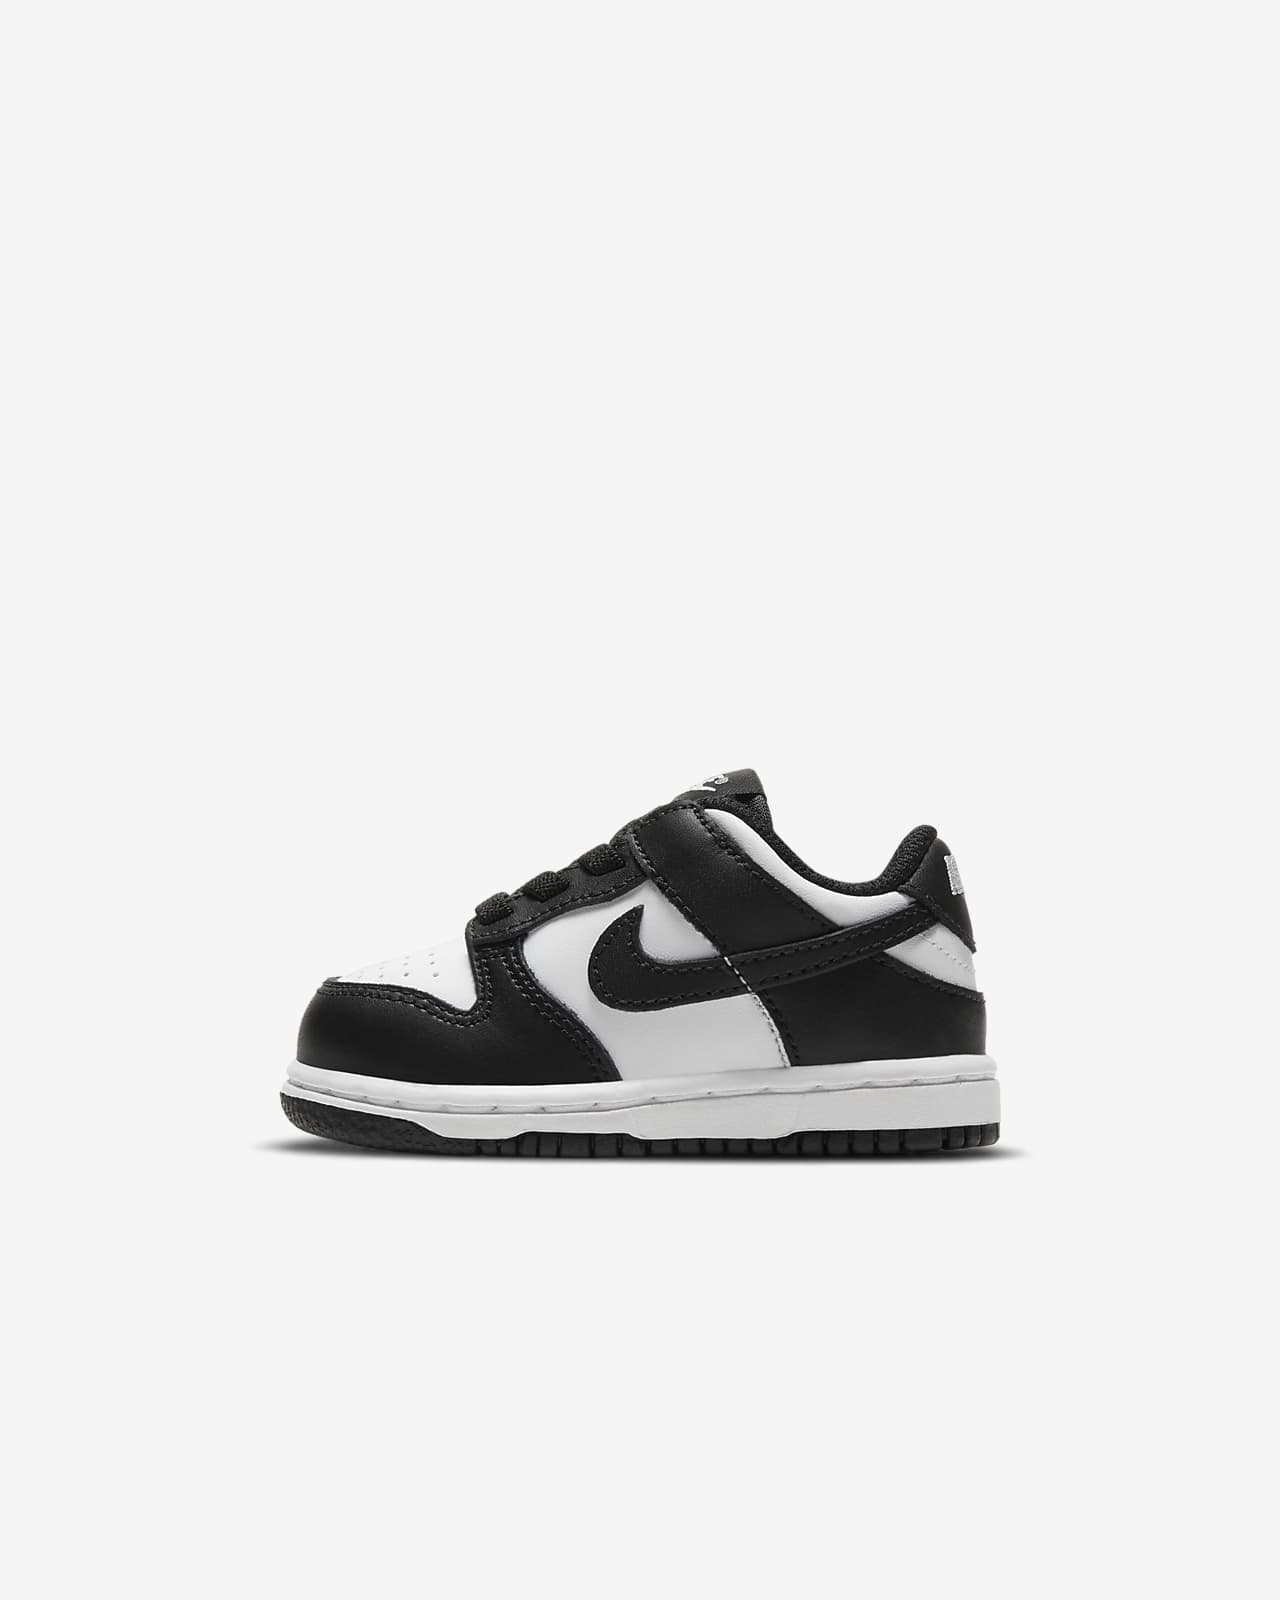 Nike Dunk Low Baby/Toddler Shoes.